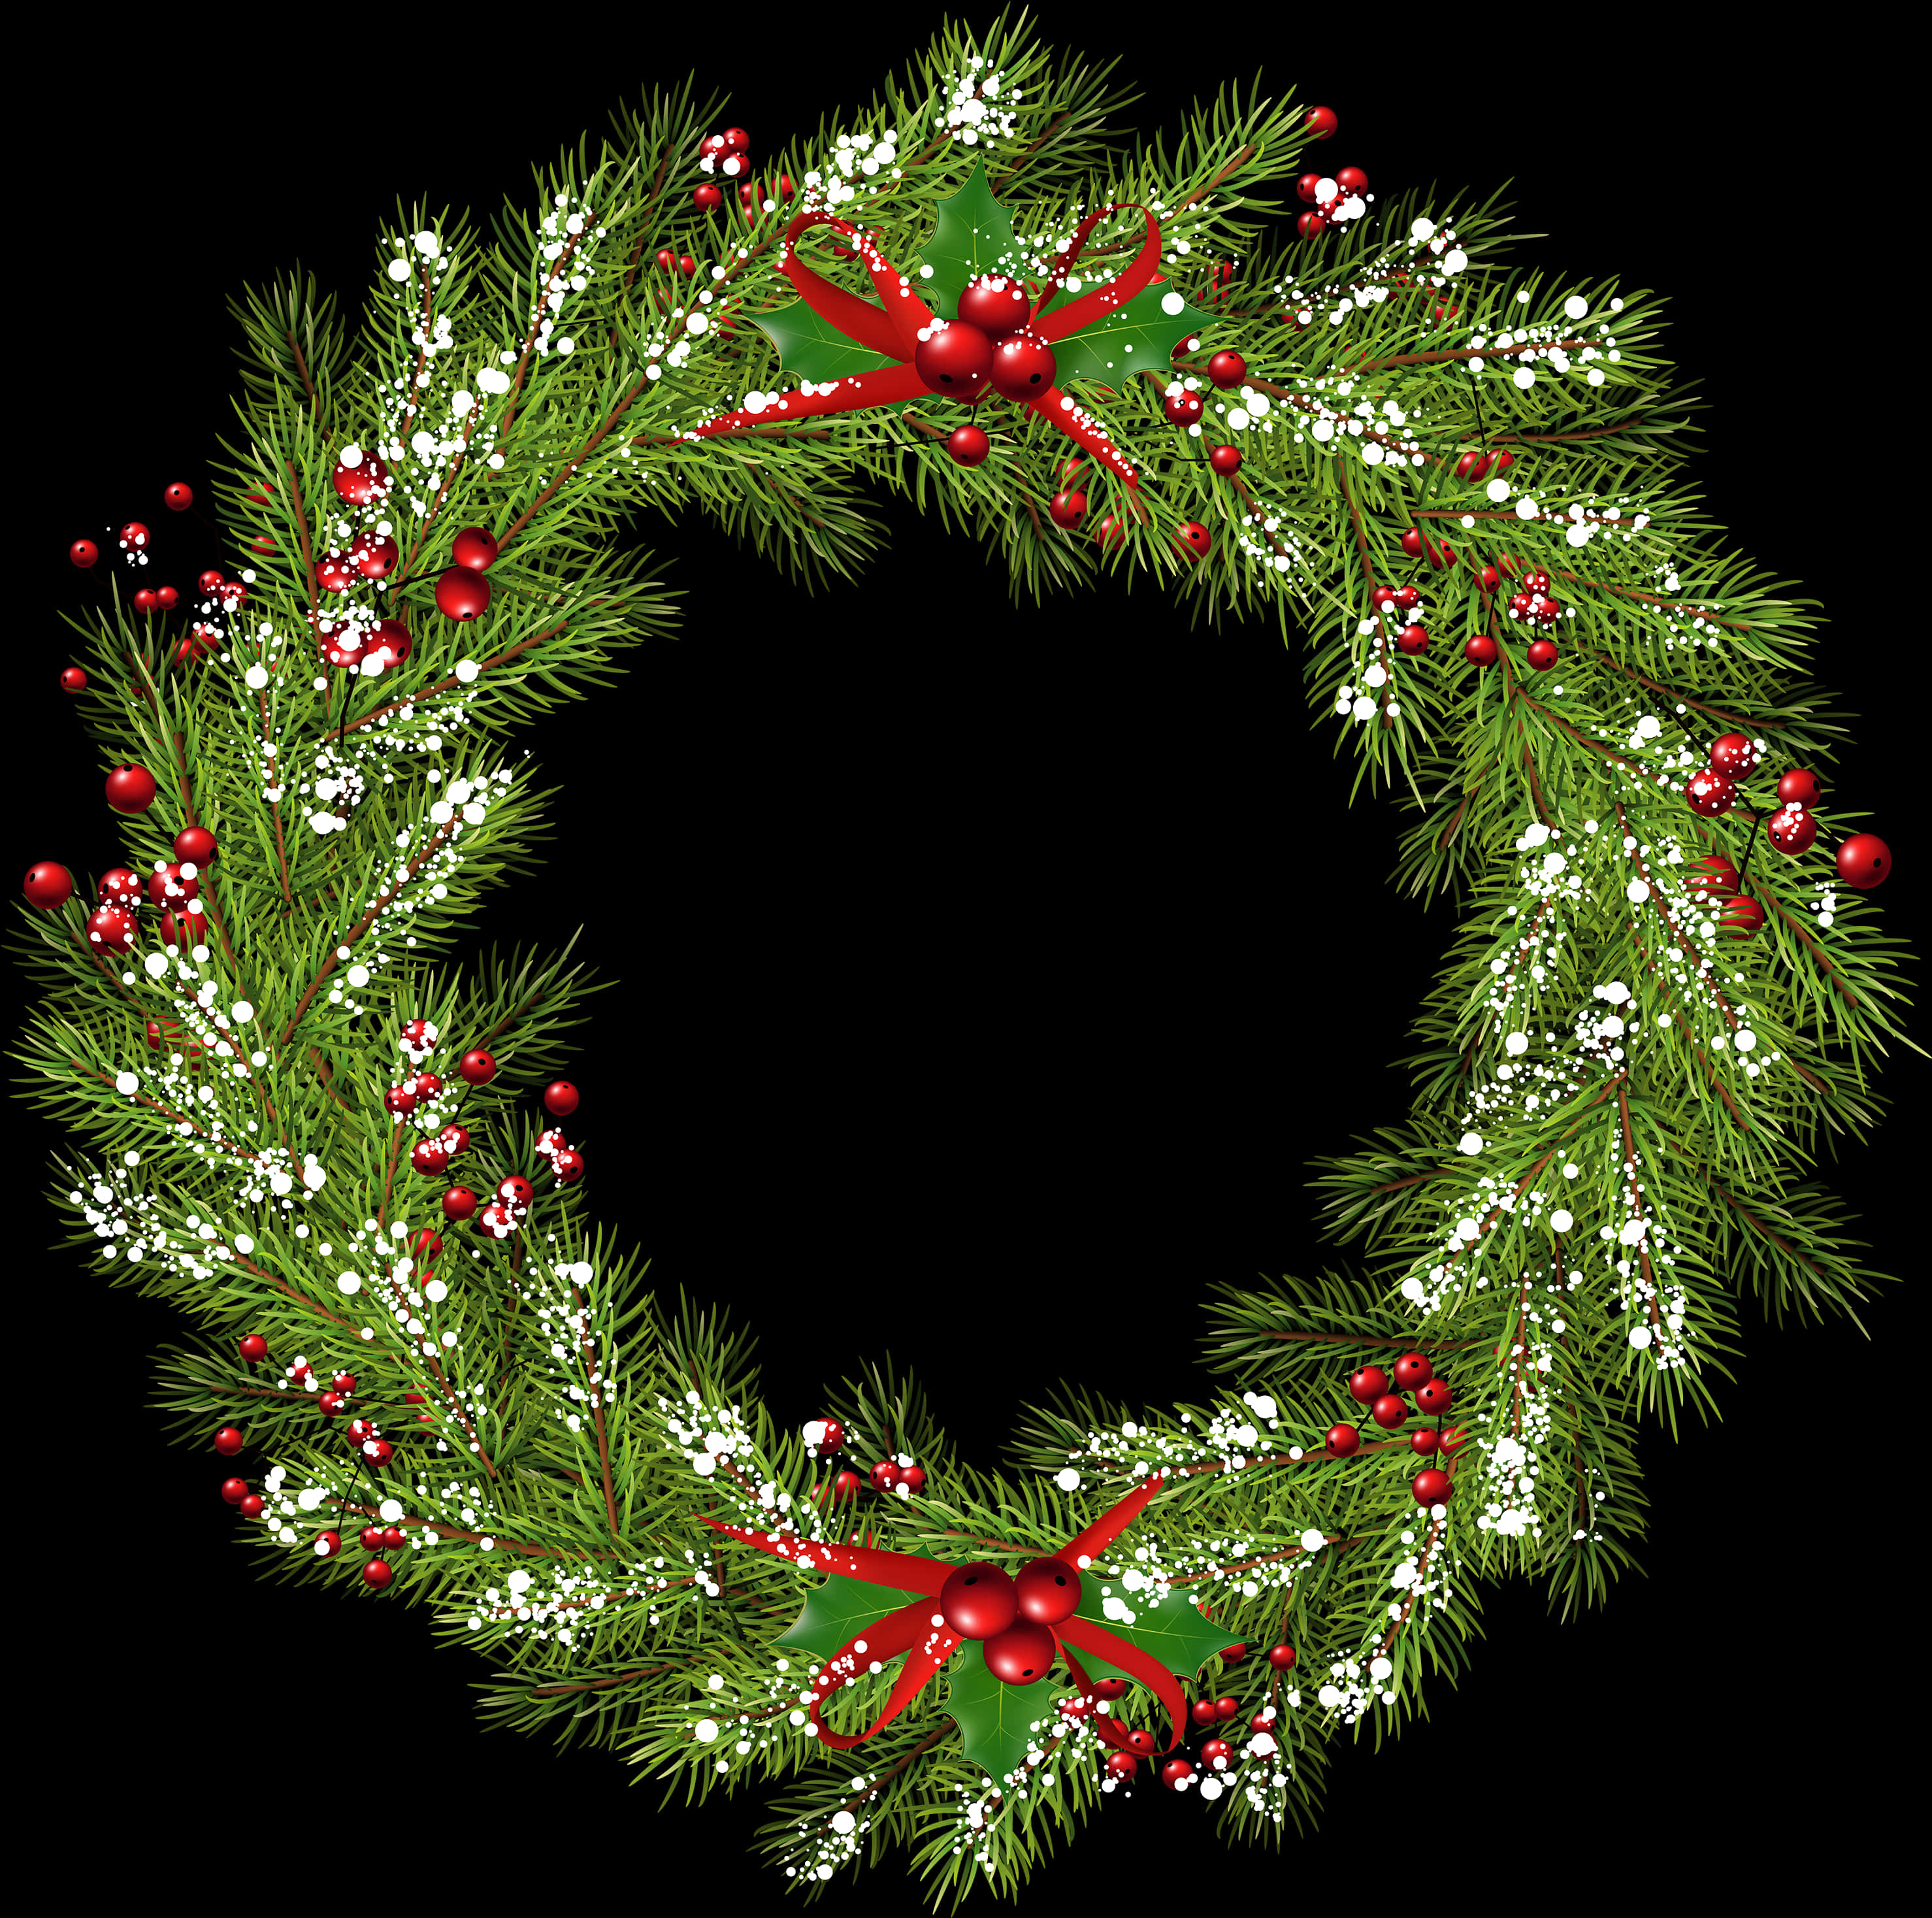 A Wreath Of Pine Branches And Berries